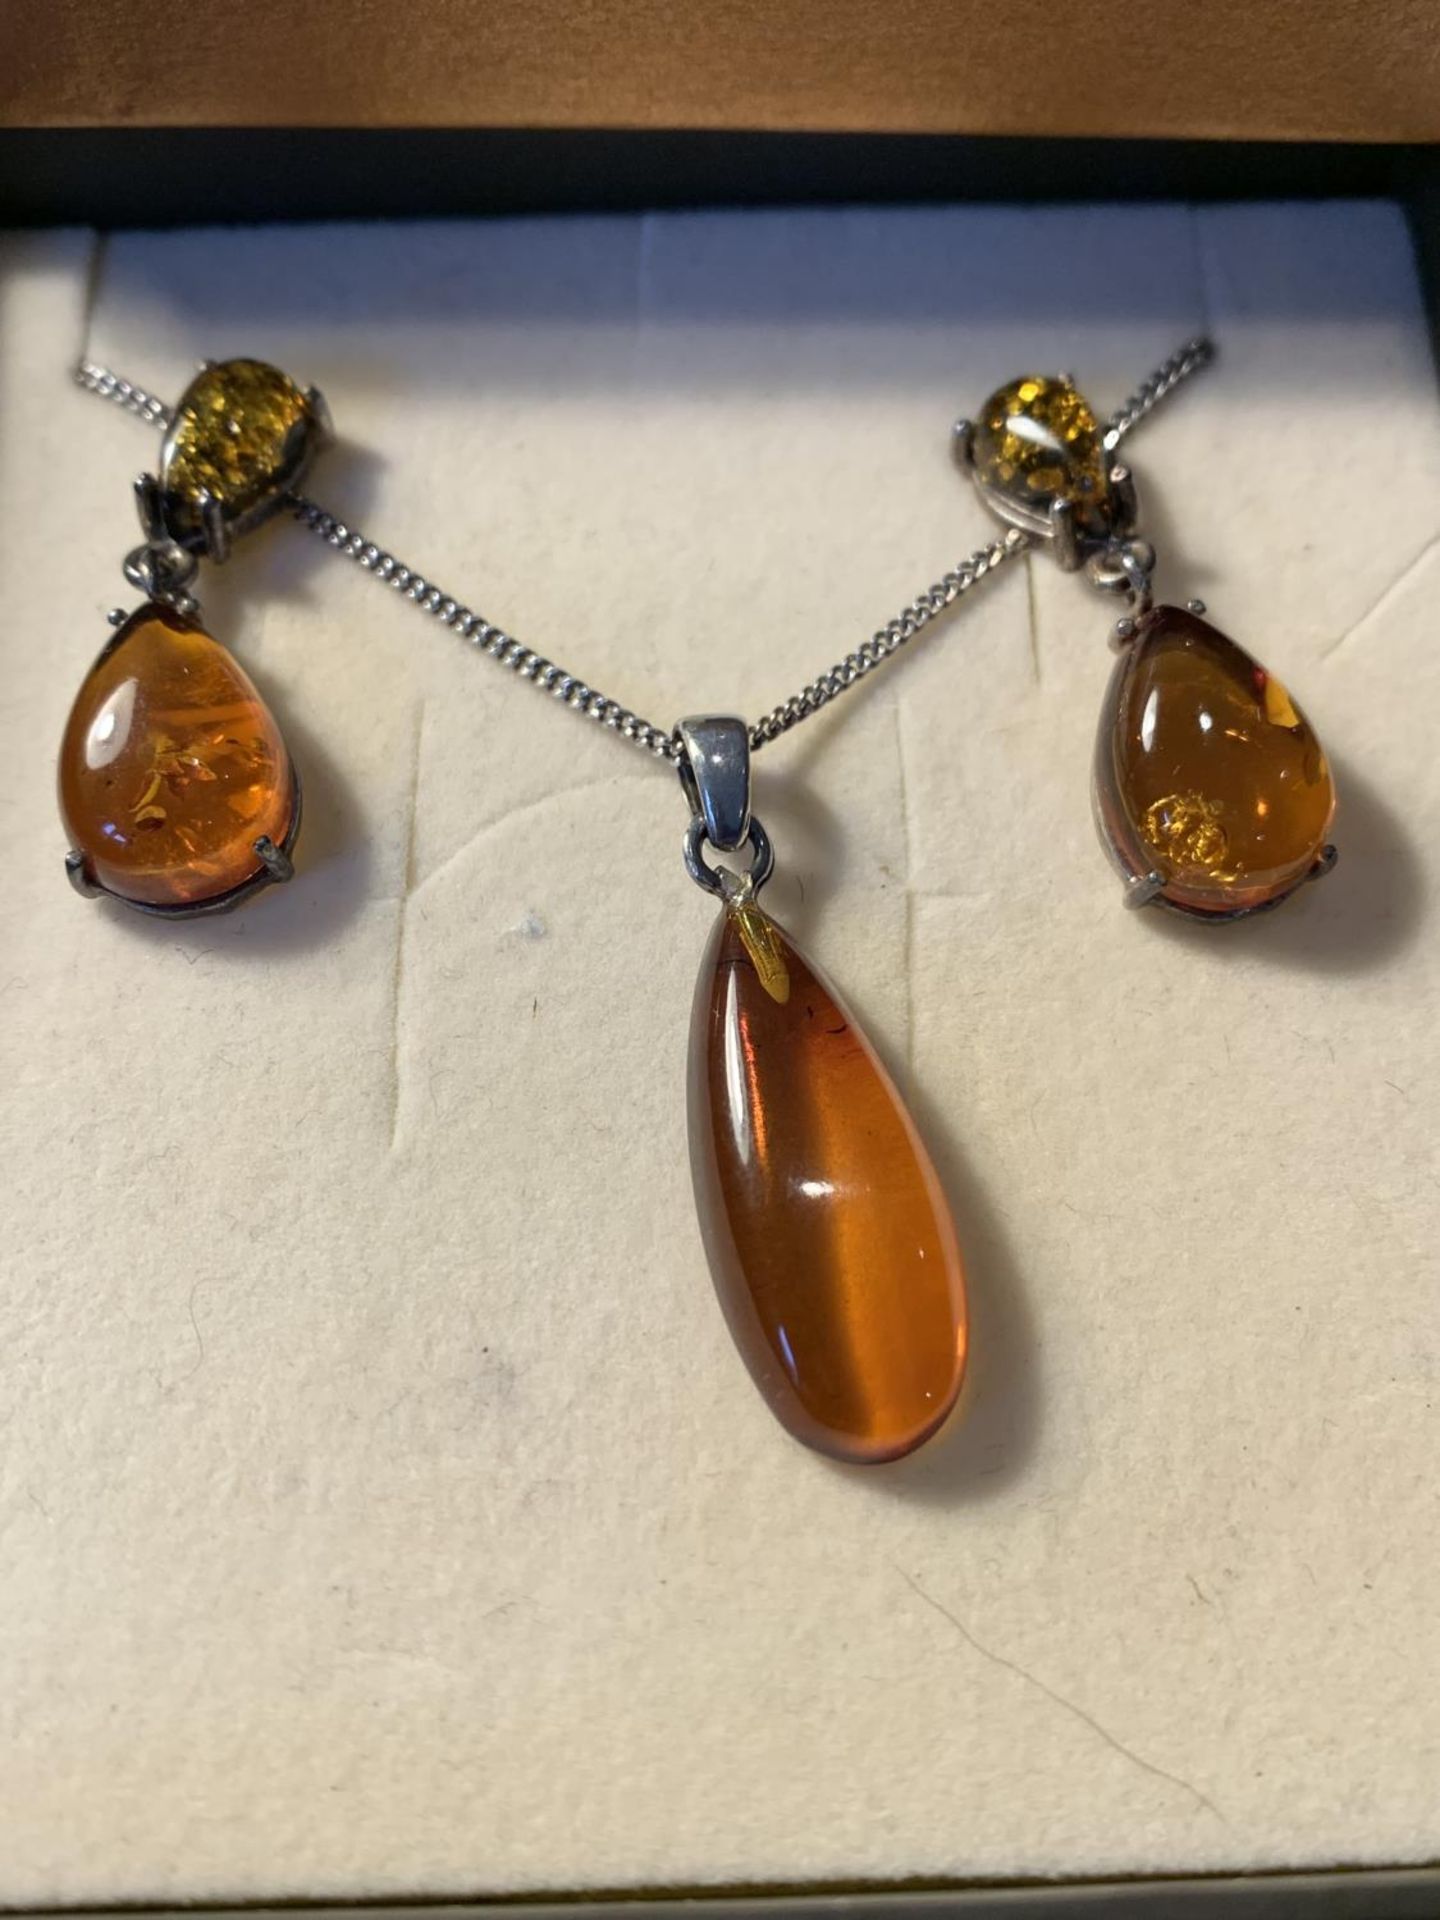 A MARKED SILVER NECKLACE WITH AMBER DROP AND MATCHING EARRINGS IN A PRESENTATION BOX - Image 2 of 4